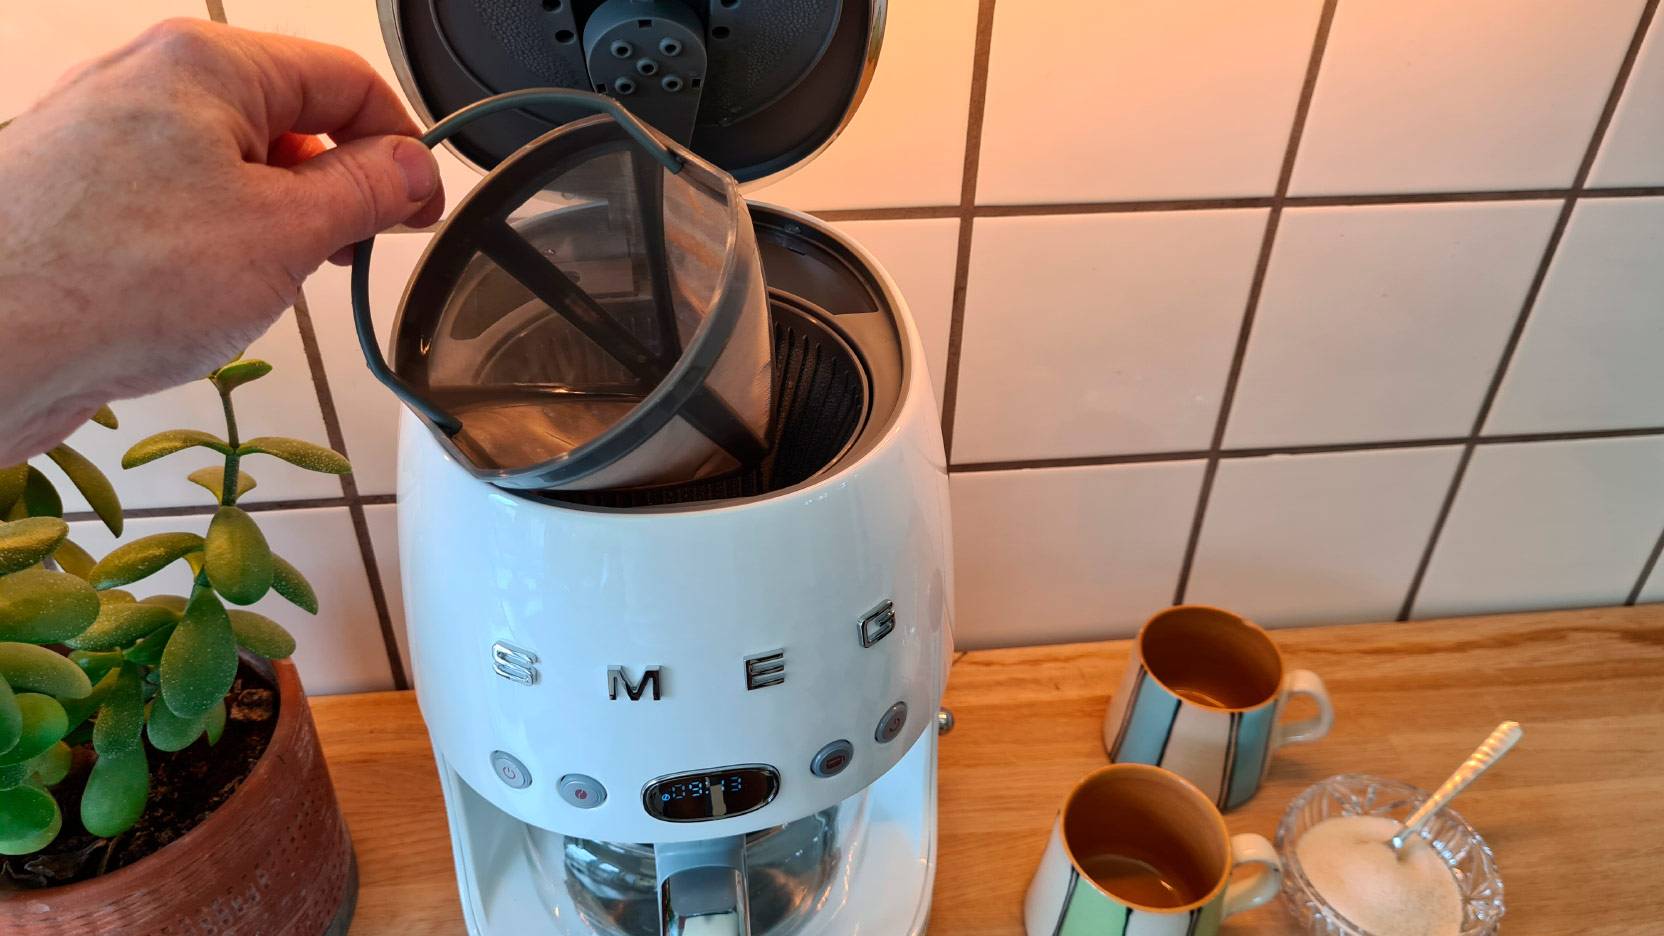 Image of the “permanent” coffee filter in the Smeg DFC02 coffee brewer